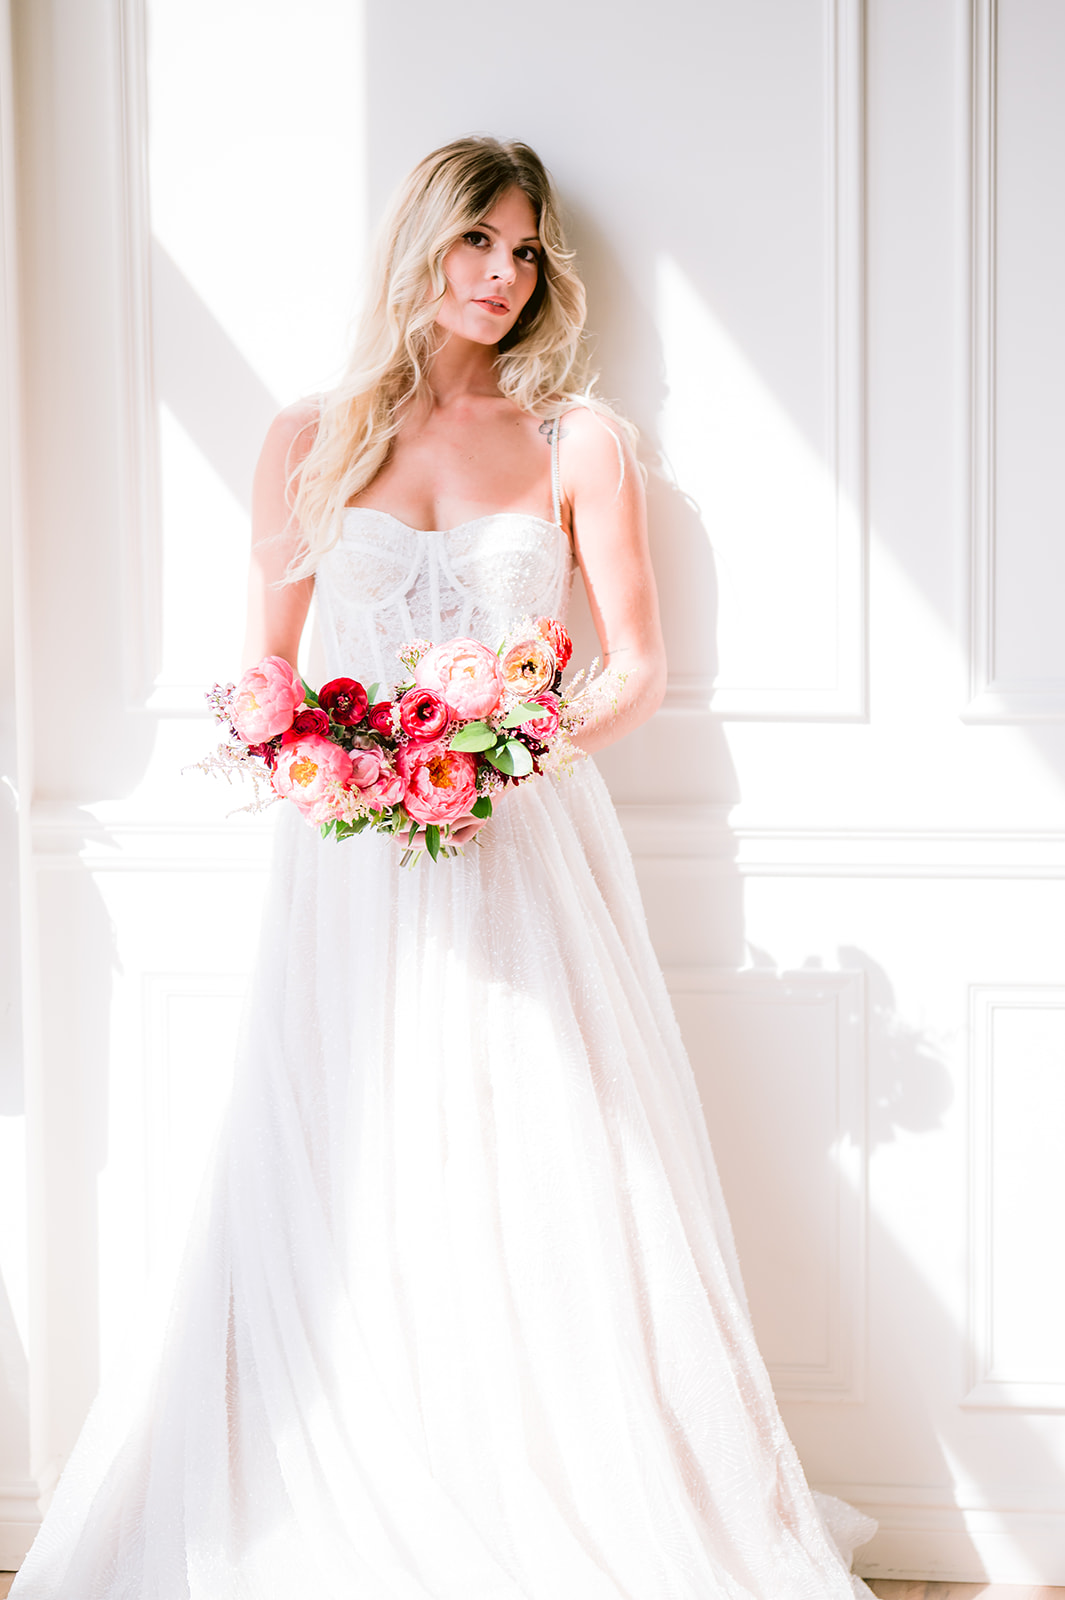 Gorgeous bride leaning against white wall as she holds her vibrant bouquet, captured by Michigan wedding photographer Mary Shelton